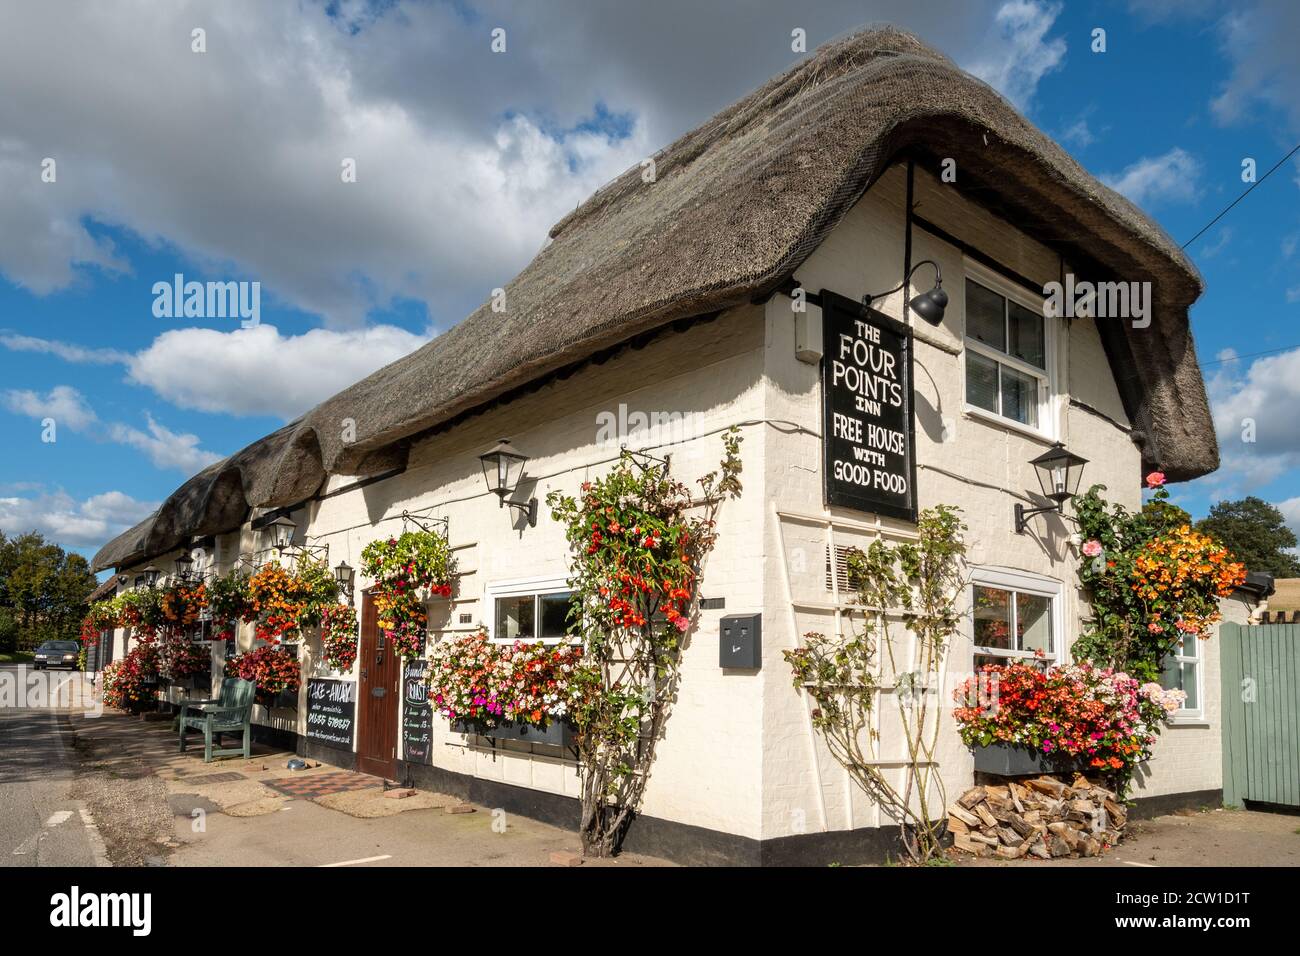 The Four Points Inn, a village pub and restaurant in Aldworth, Berkshire, UK. Exterior of the public house decorated with flowers and hanging baskets Stock Photo